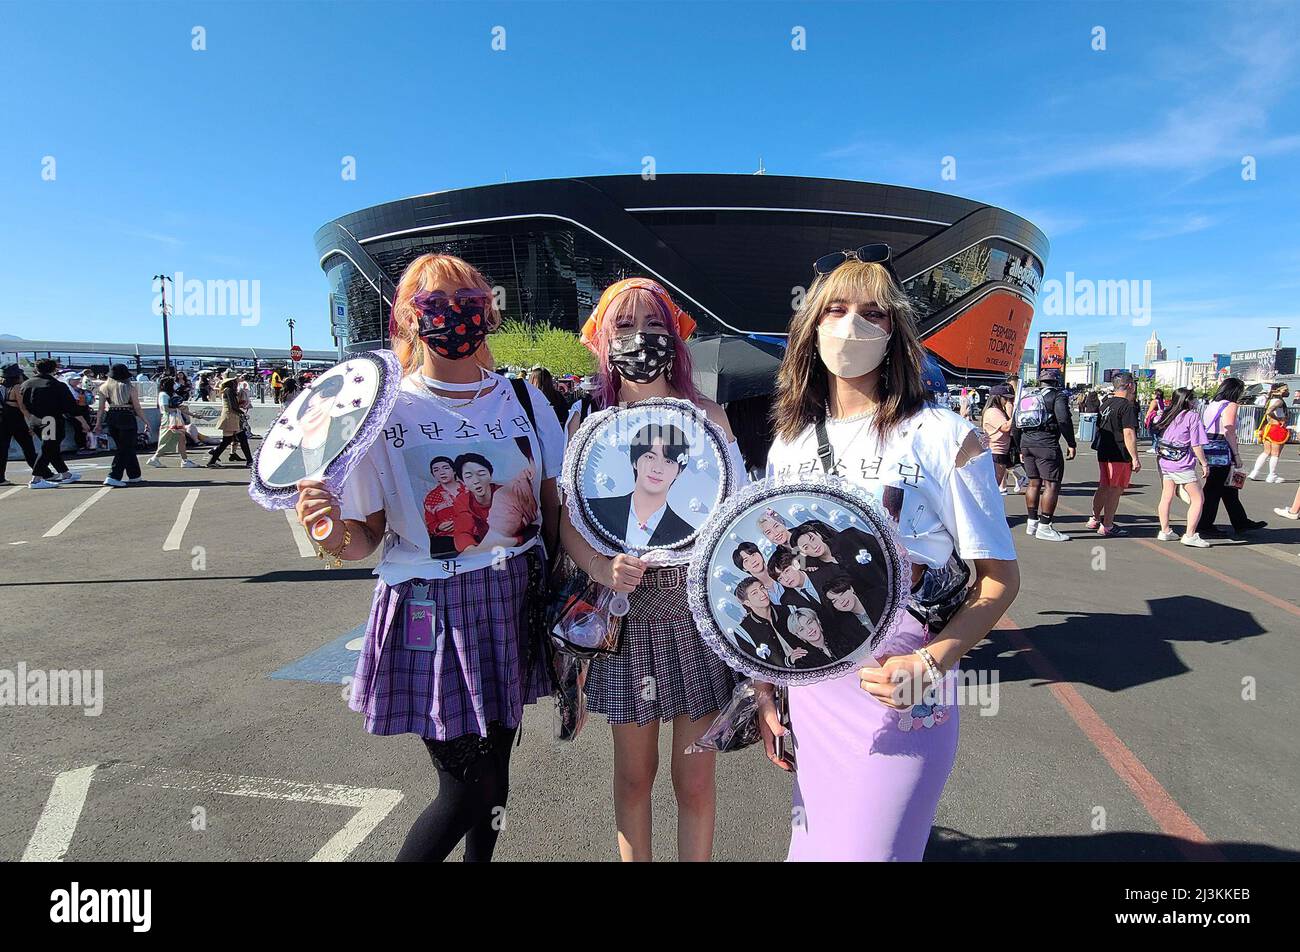 South Korea. 09th Apr, 2022. 09th Apr, 2022. BTS fans at concert BTS fans,  referred to as Army, pose for a photo before entering the Permission to  Dance on Stage - Las